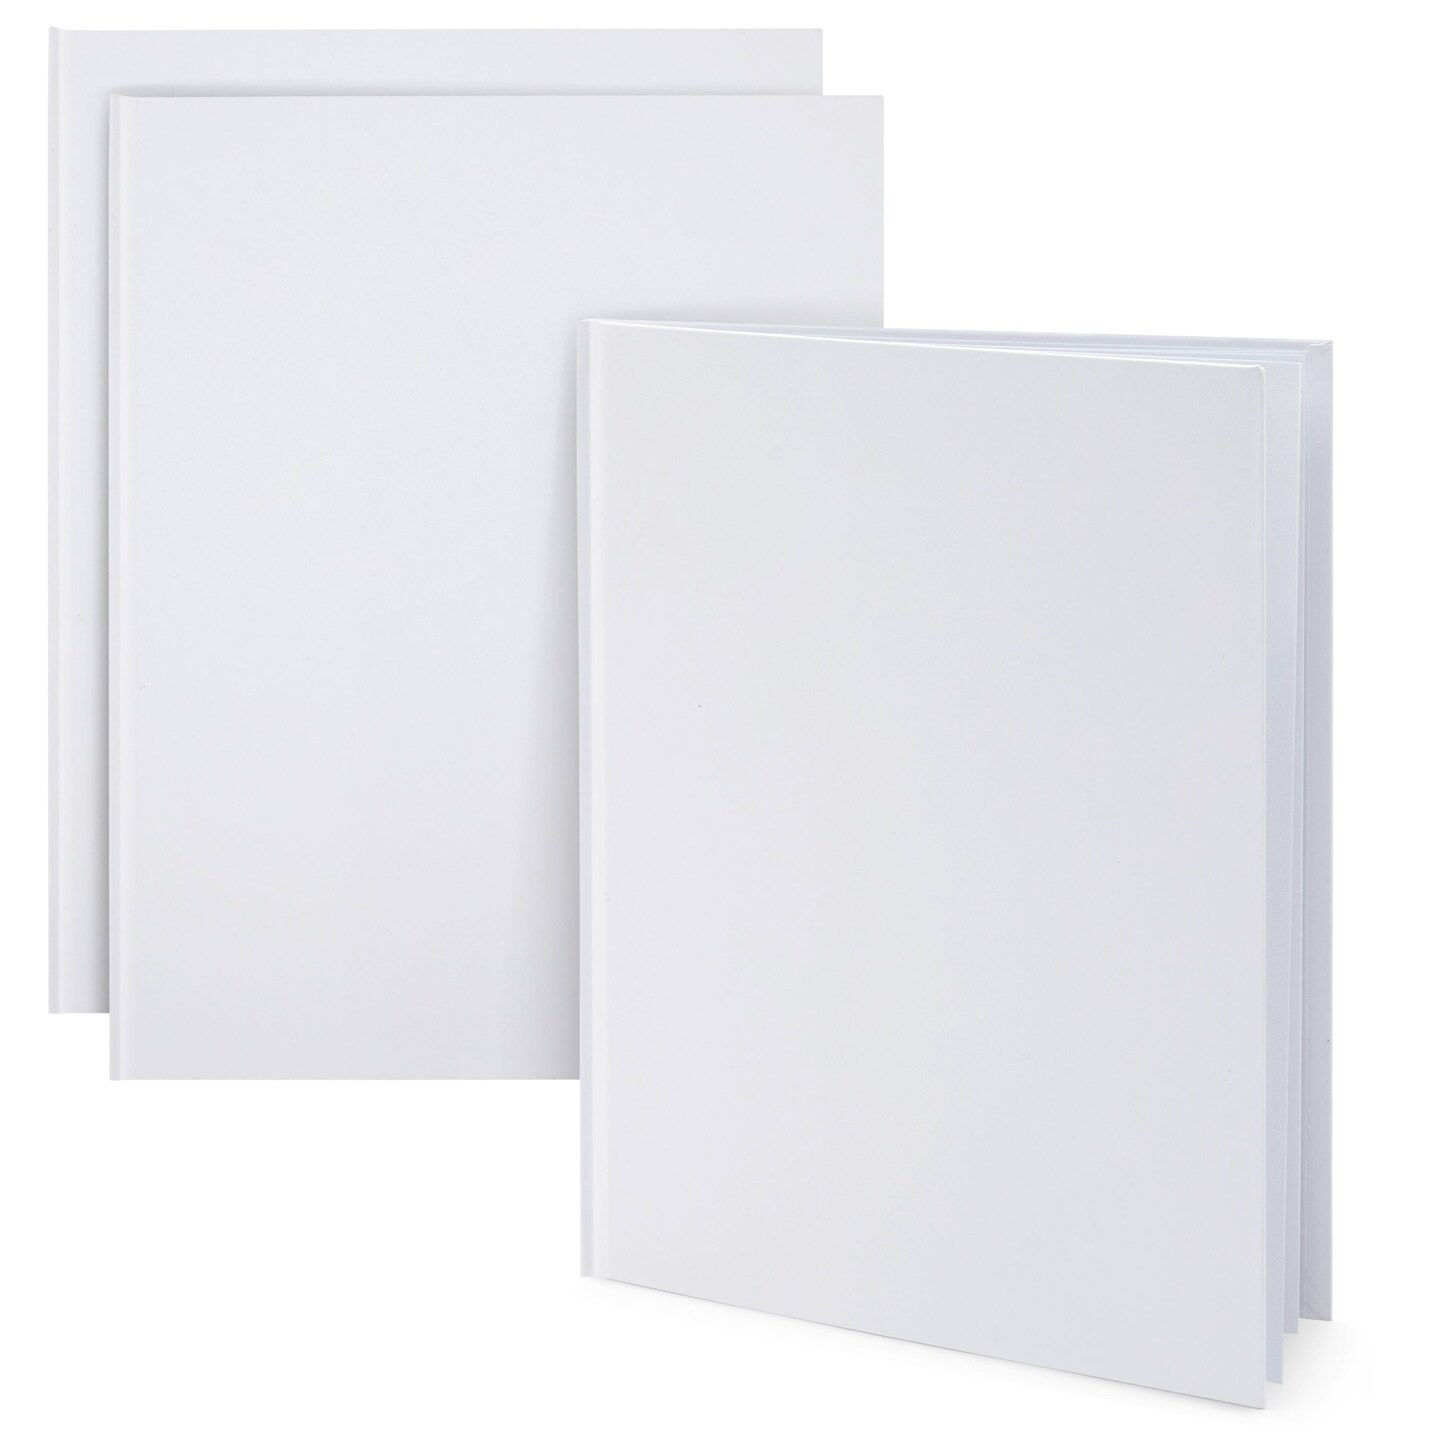 6 Pack White Hardcover Blank Book, Unlined Plain Journals for